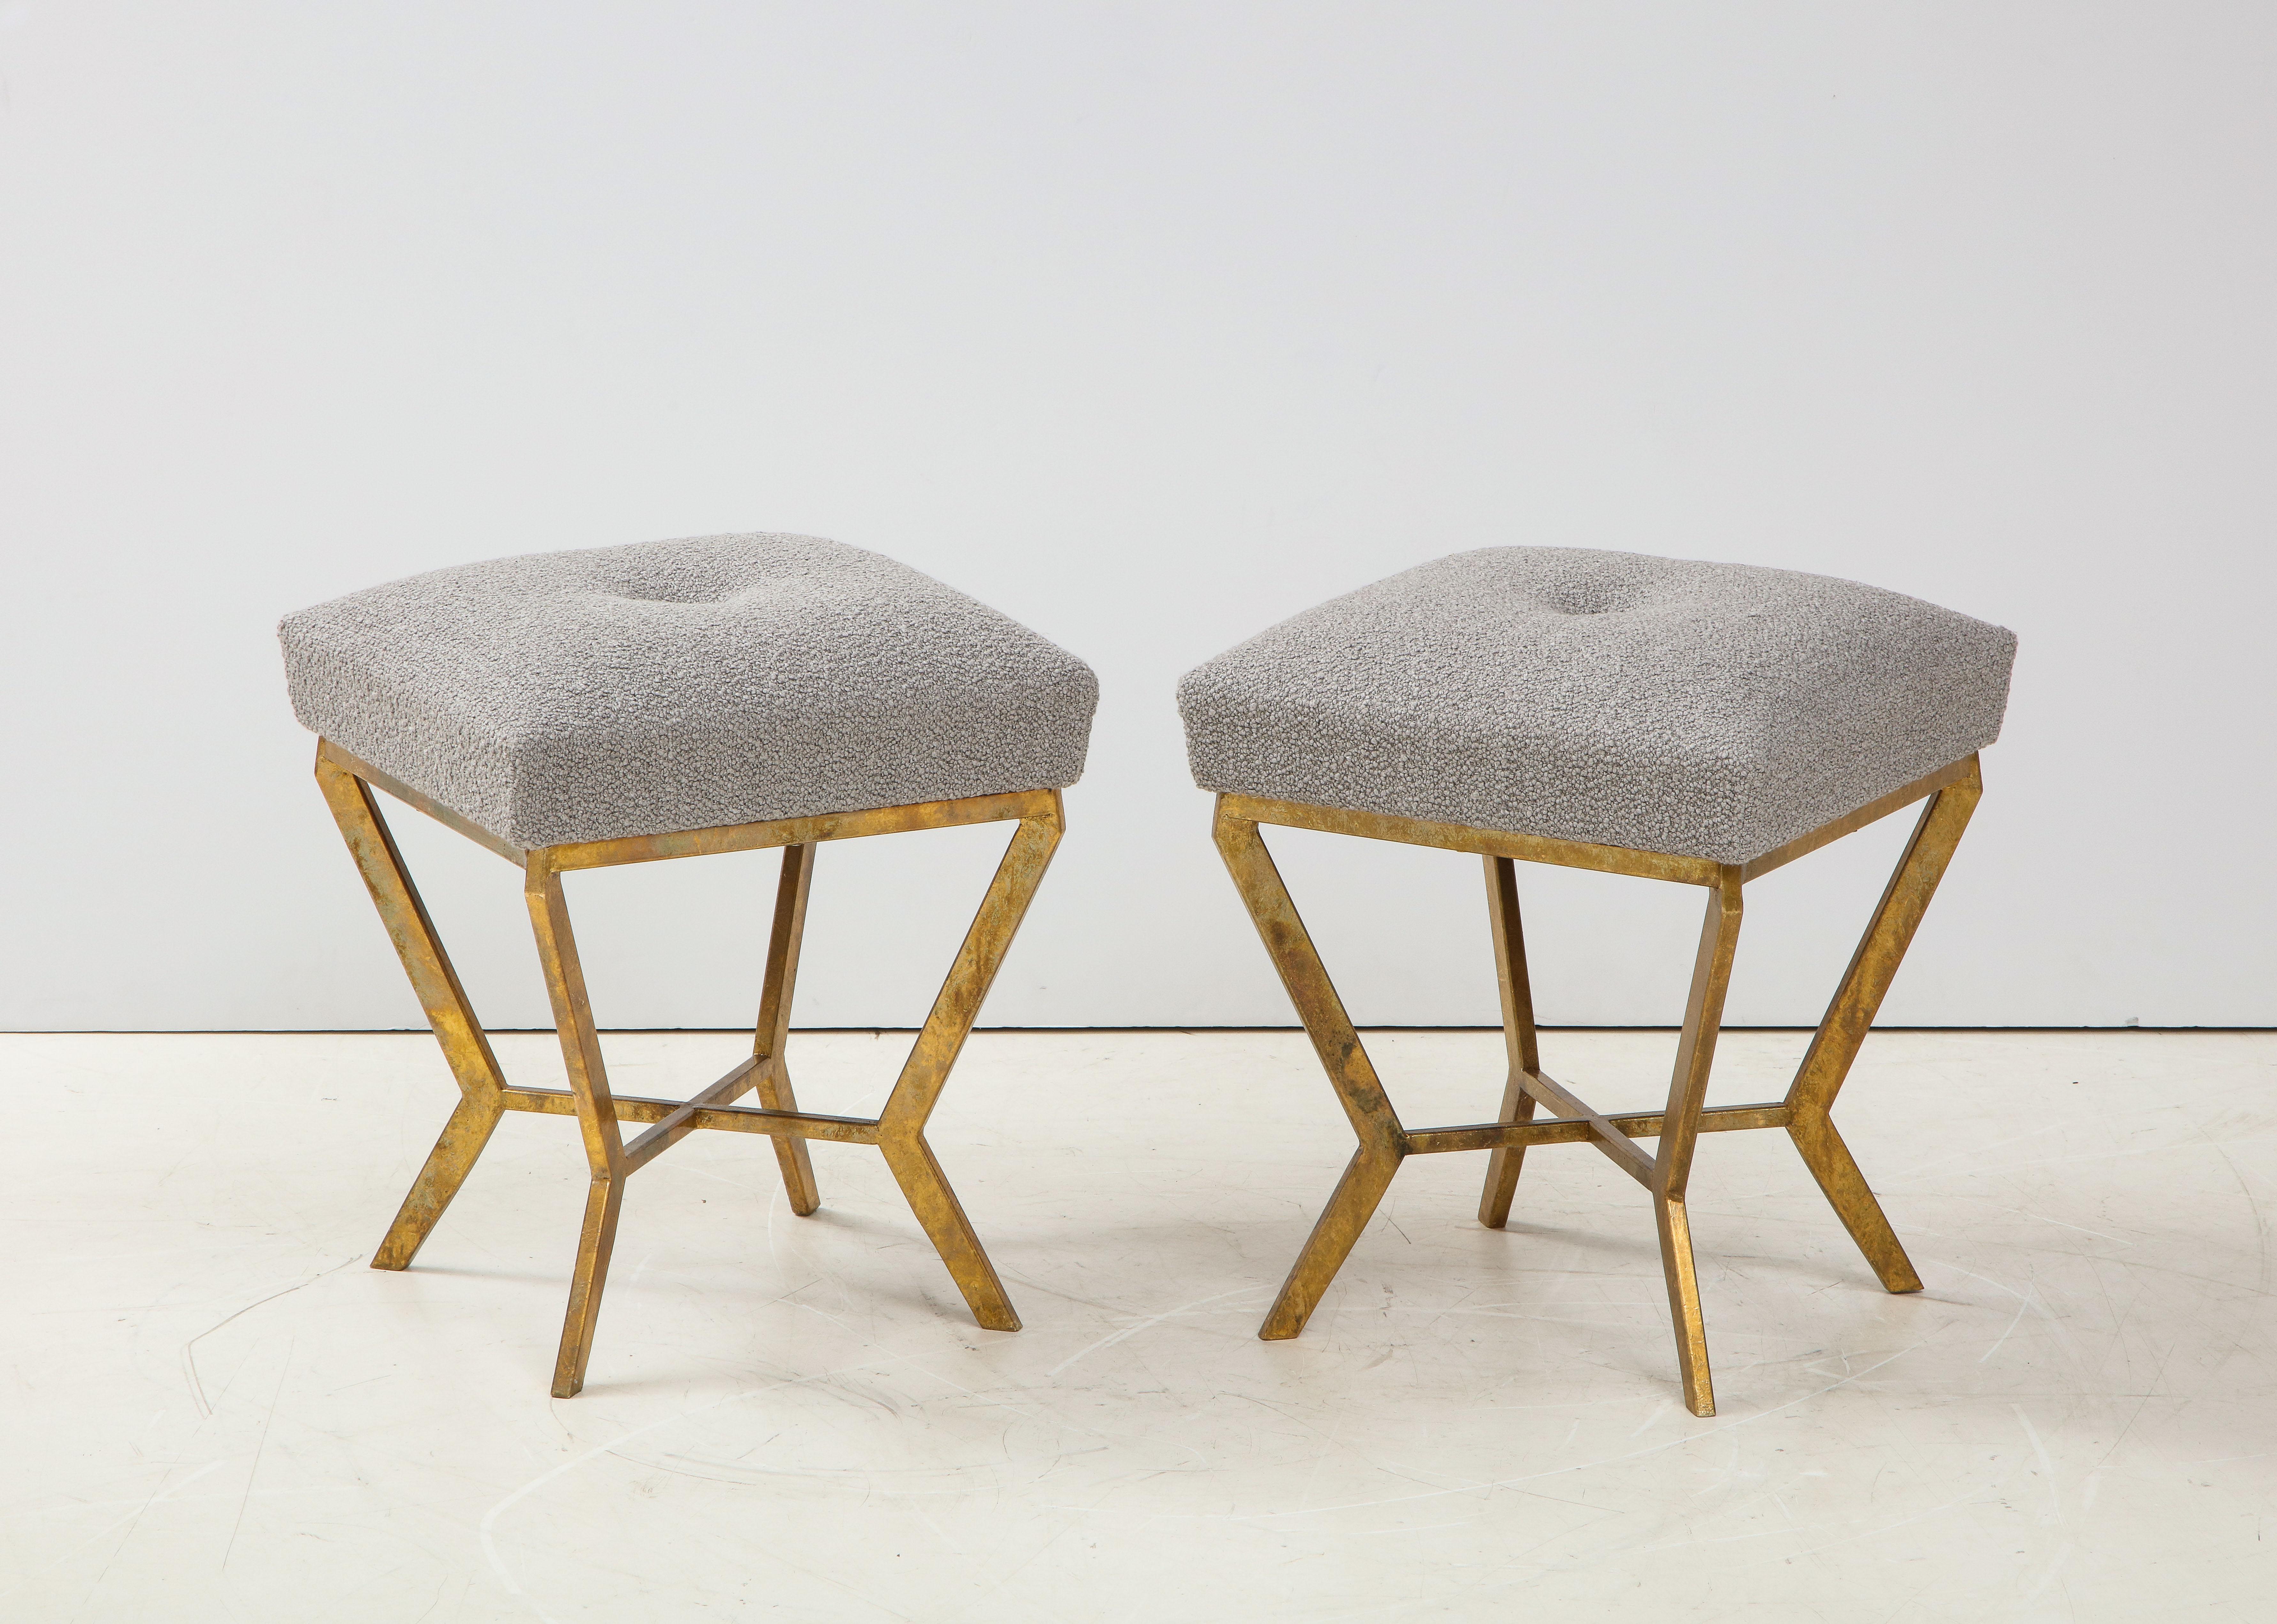 Hollywood Regency Pair of Gilded Gold Leaf Iron Stools with Tufted Grey Boucle, Italy, 2021